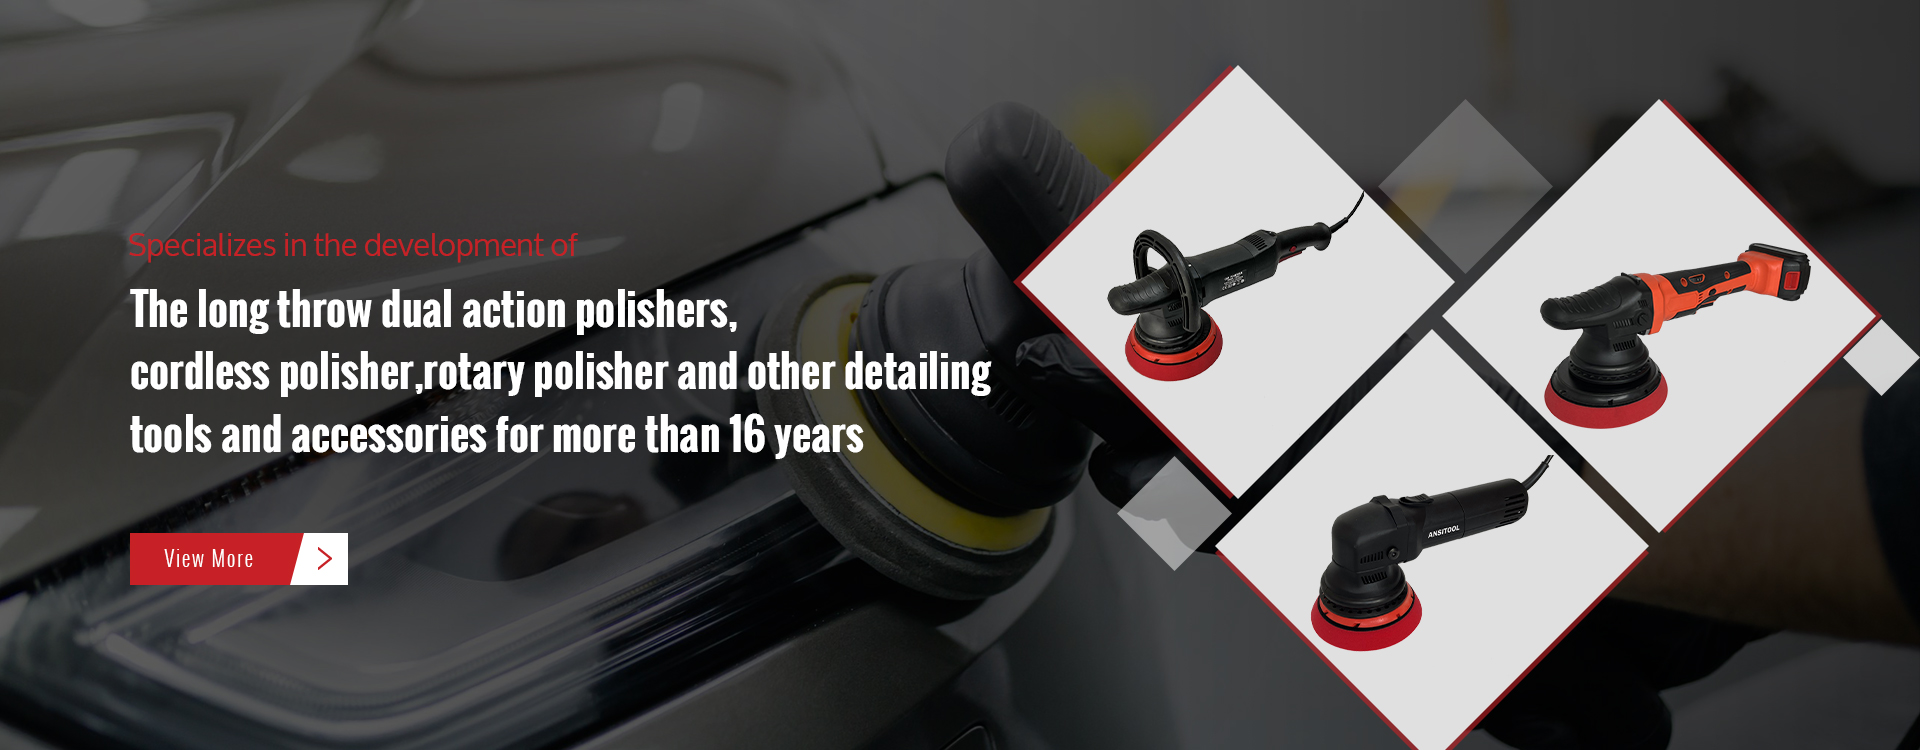 21mm dual action polisher